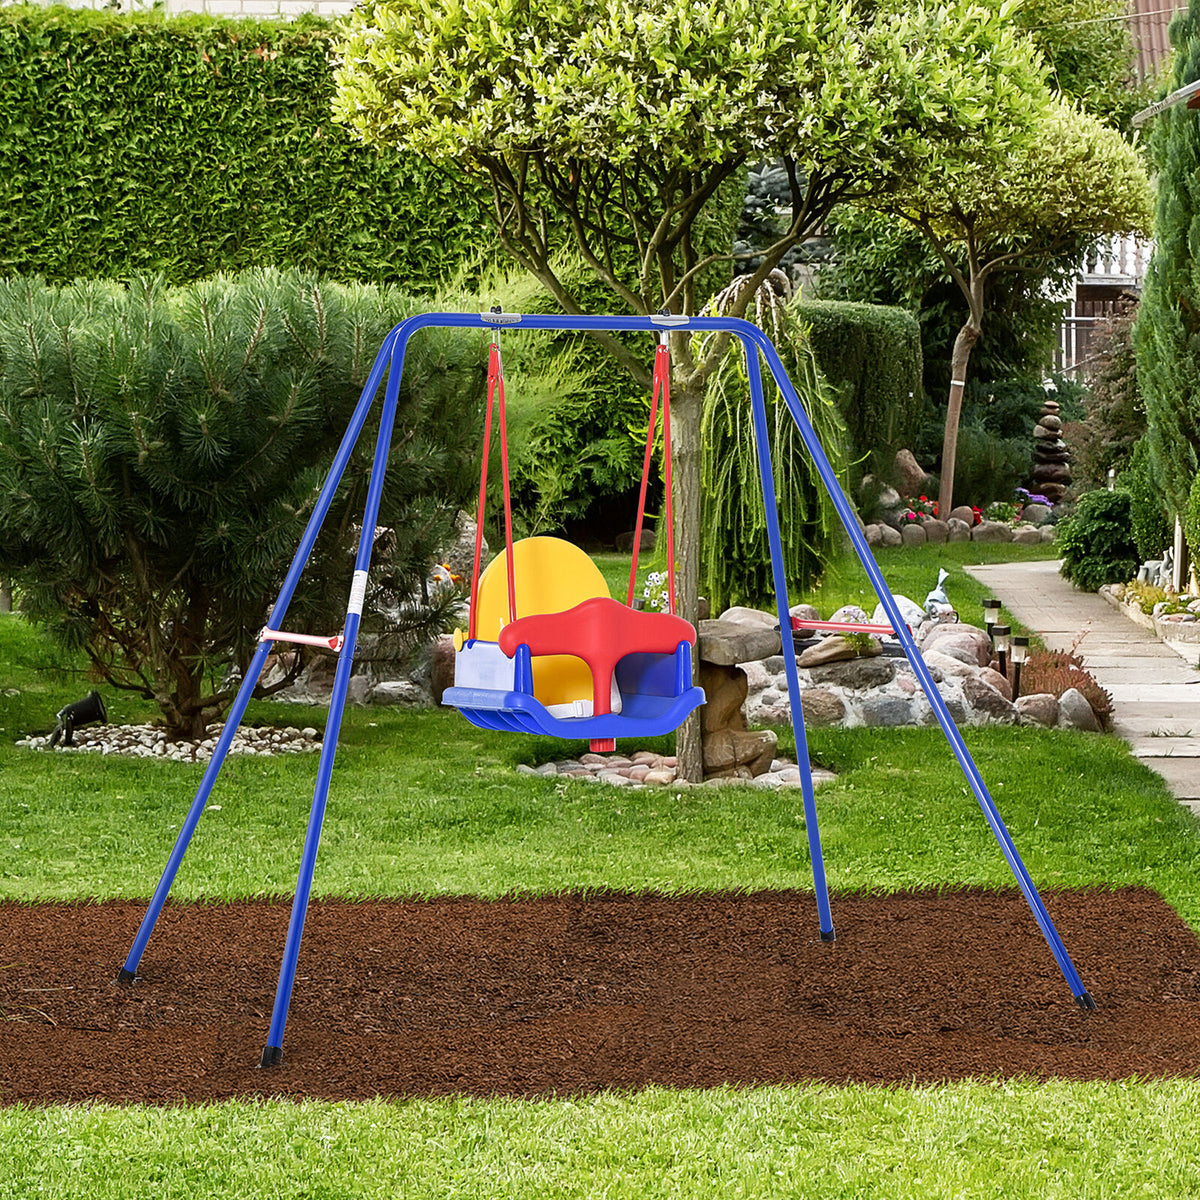 Outdoor Playground Swing Set for Children with Safety Harness